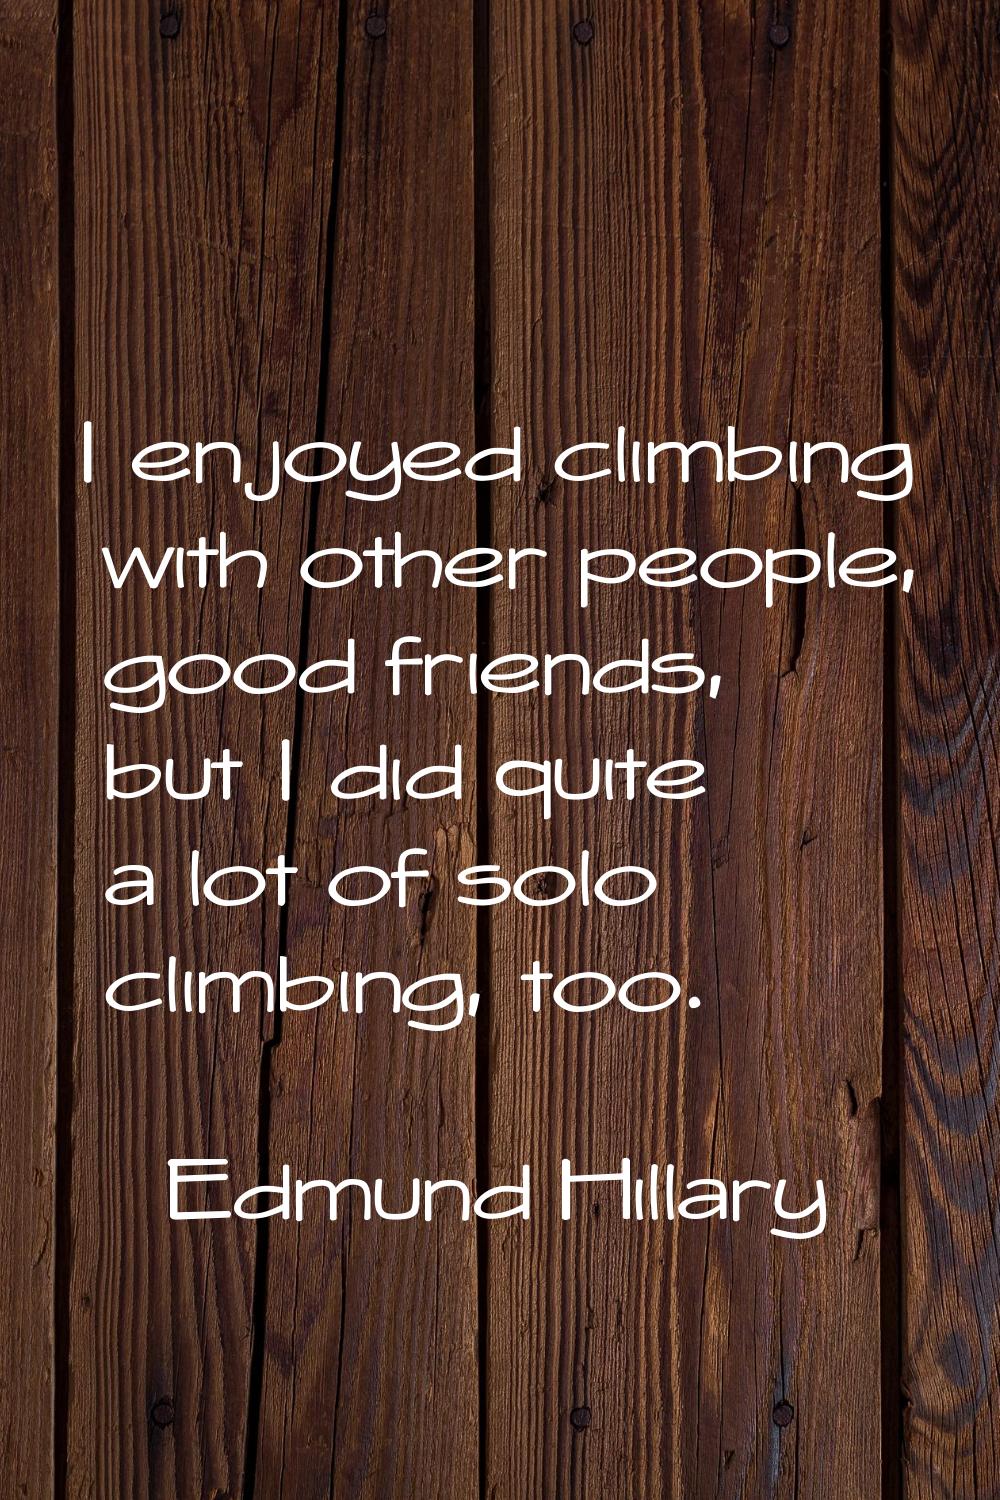 I enjoyed climbing with other people, good friends, but I did quite a lot of solo climbing, too.